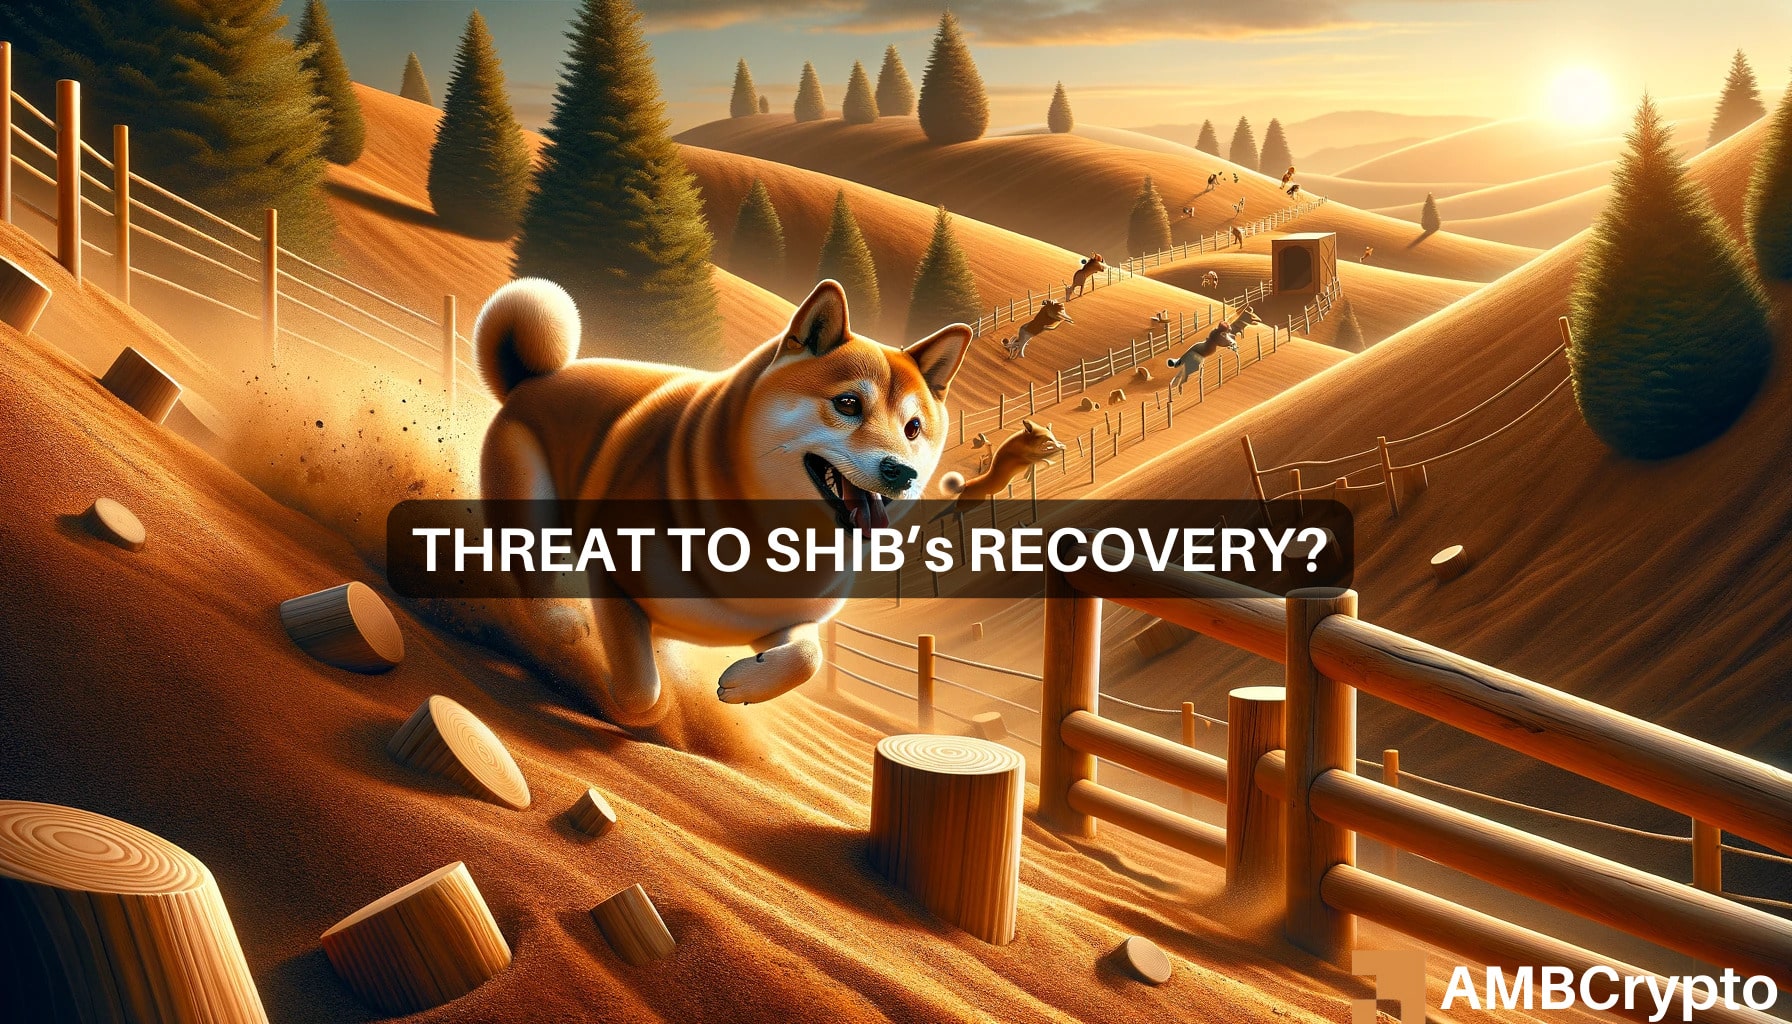  There's more to SHIB's recovery than you think